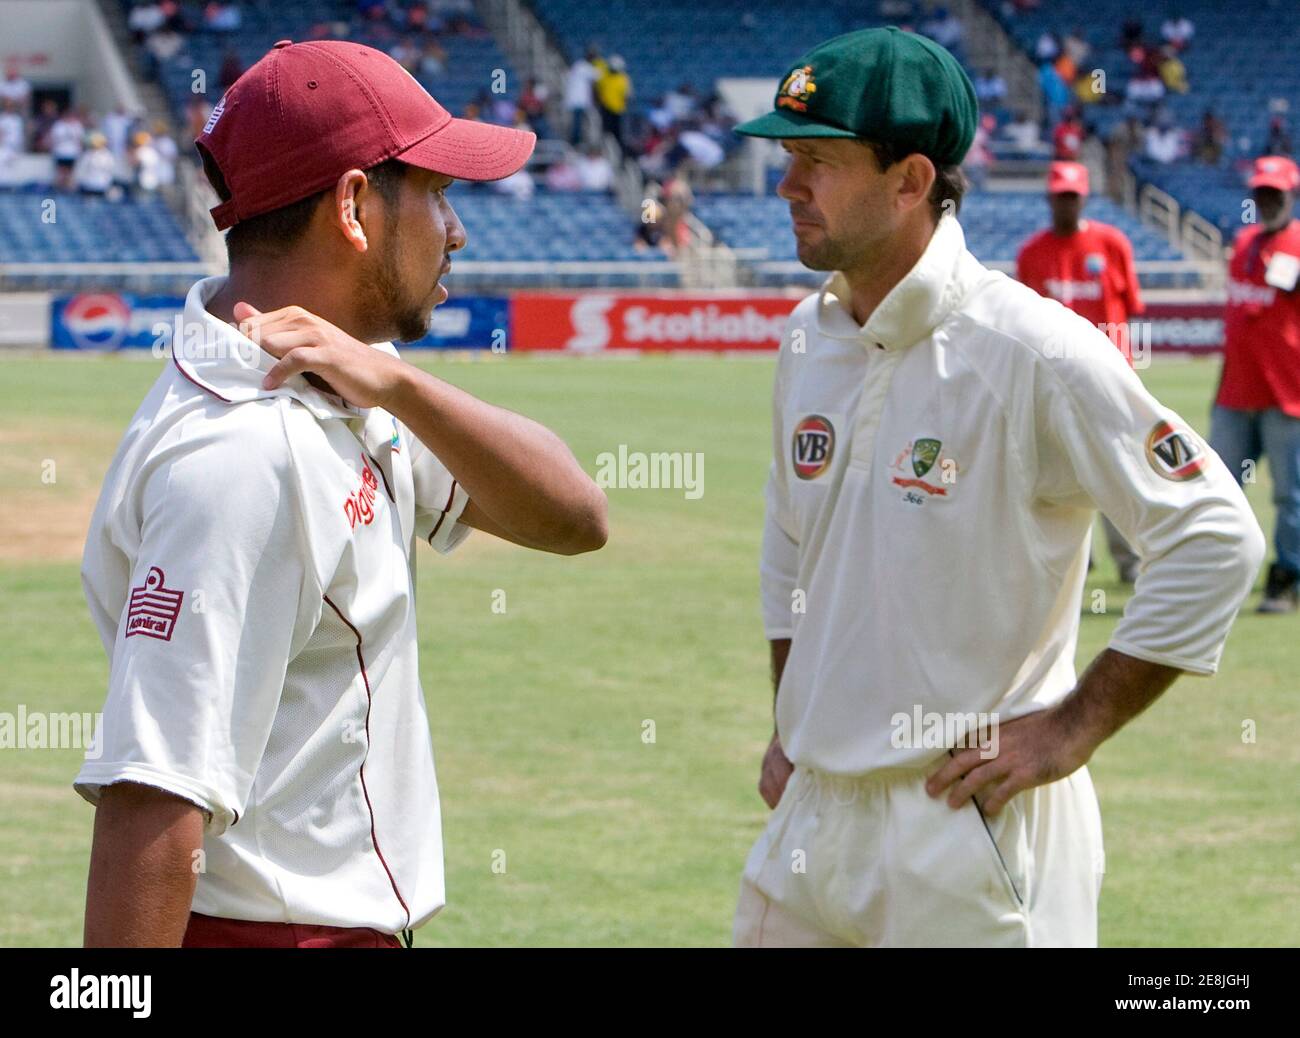 West Indies captain Ramnaresh Sarwan (L) walks past Australia's captain Ricky Ponting following the final day of their first cricket test match in Kingston, Jamaica May 26, 2008. Australia won the match.    REUTERS/Andy Clark     (JAMAICA) Stock Photo